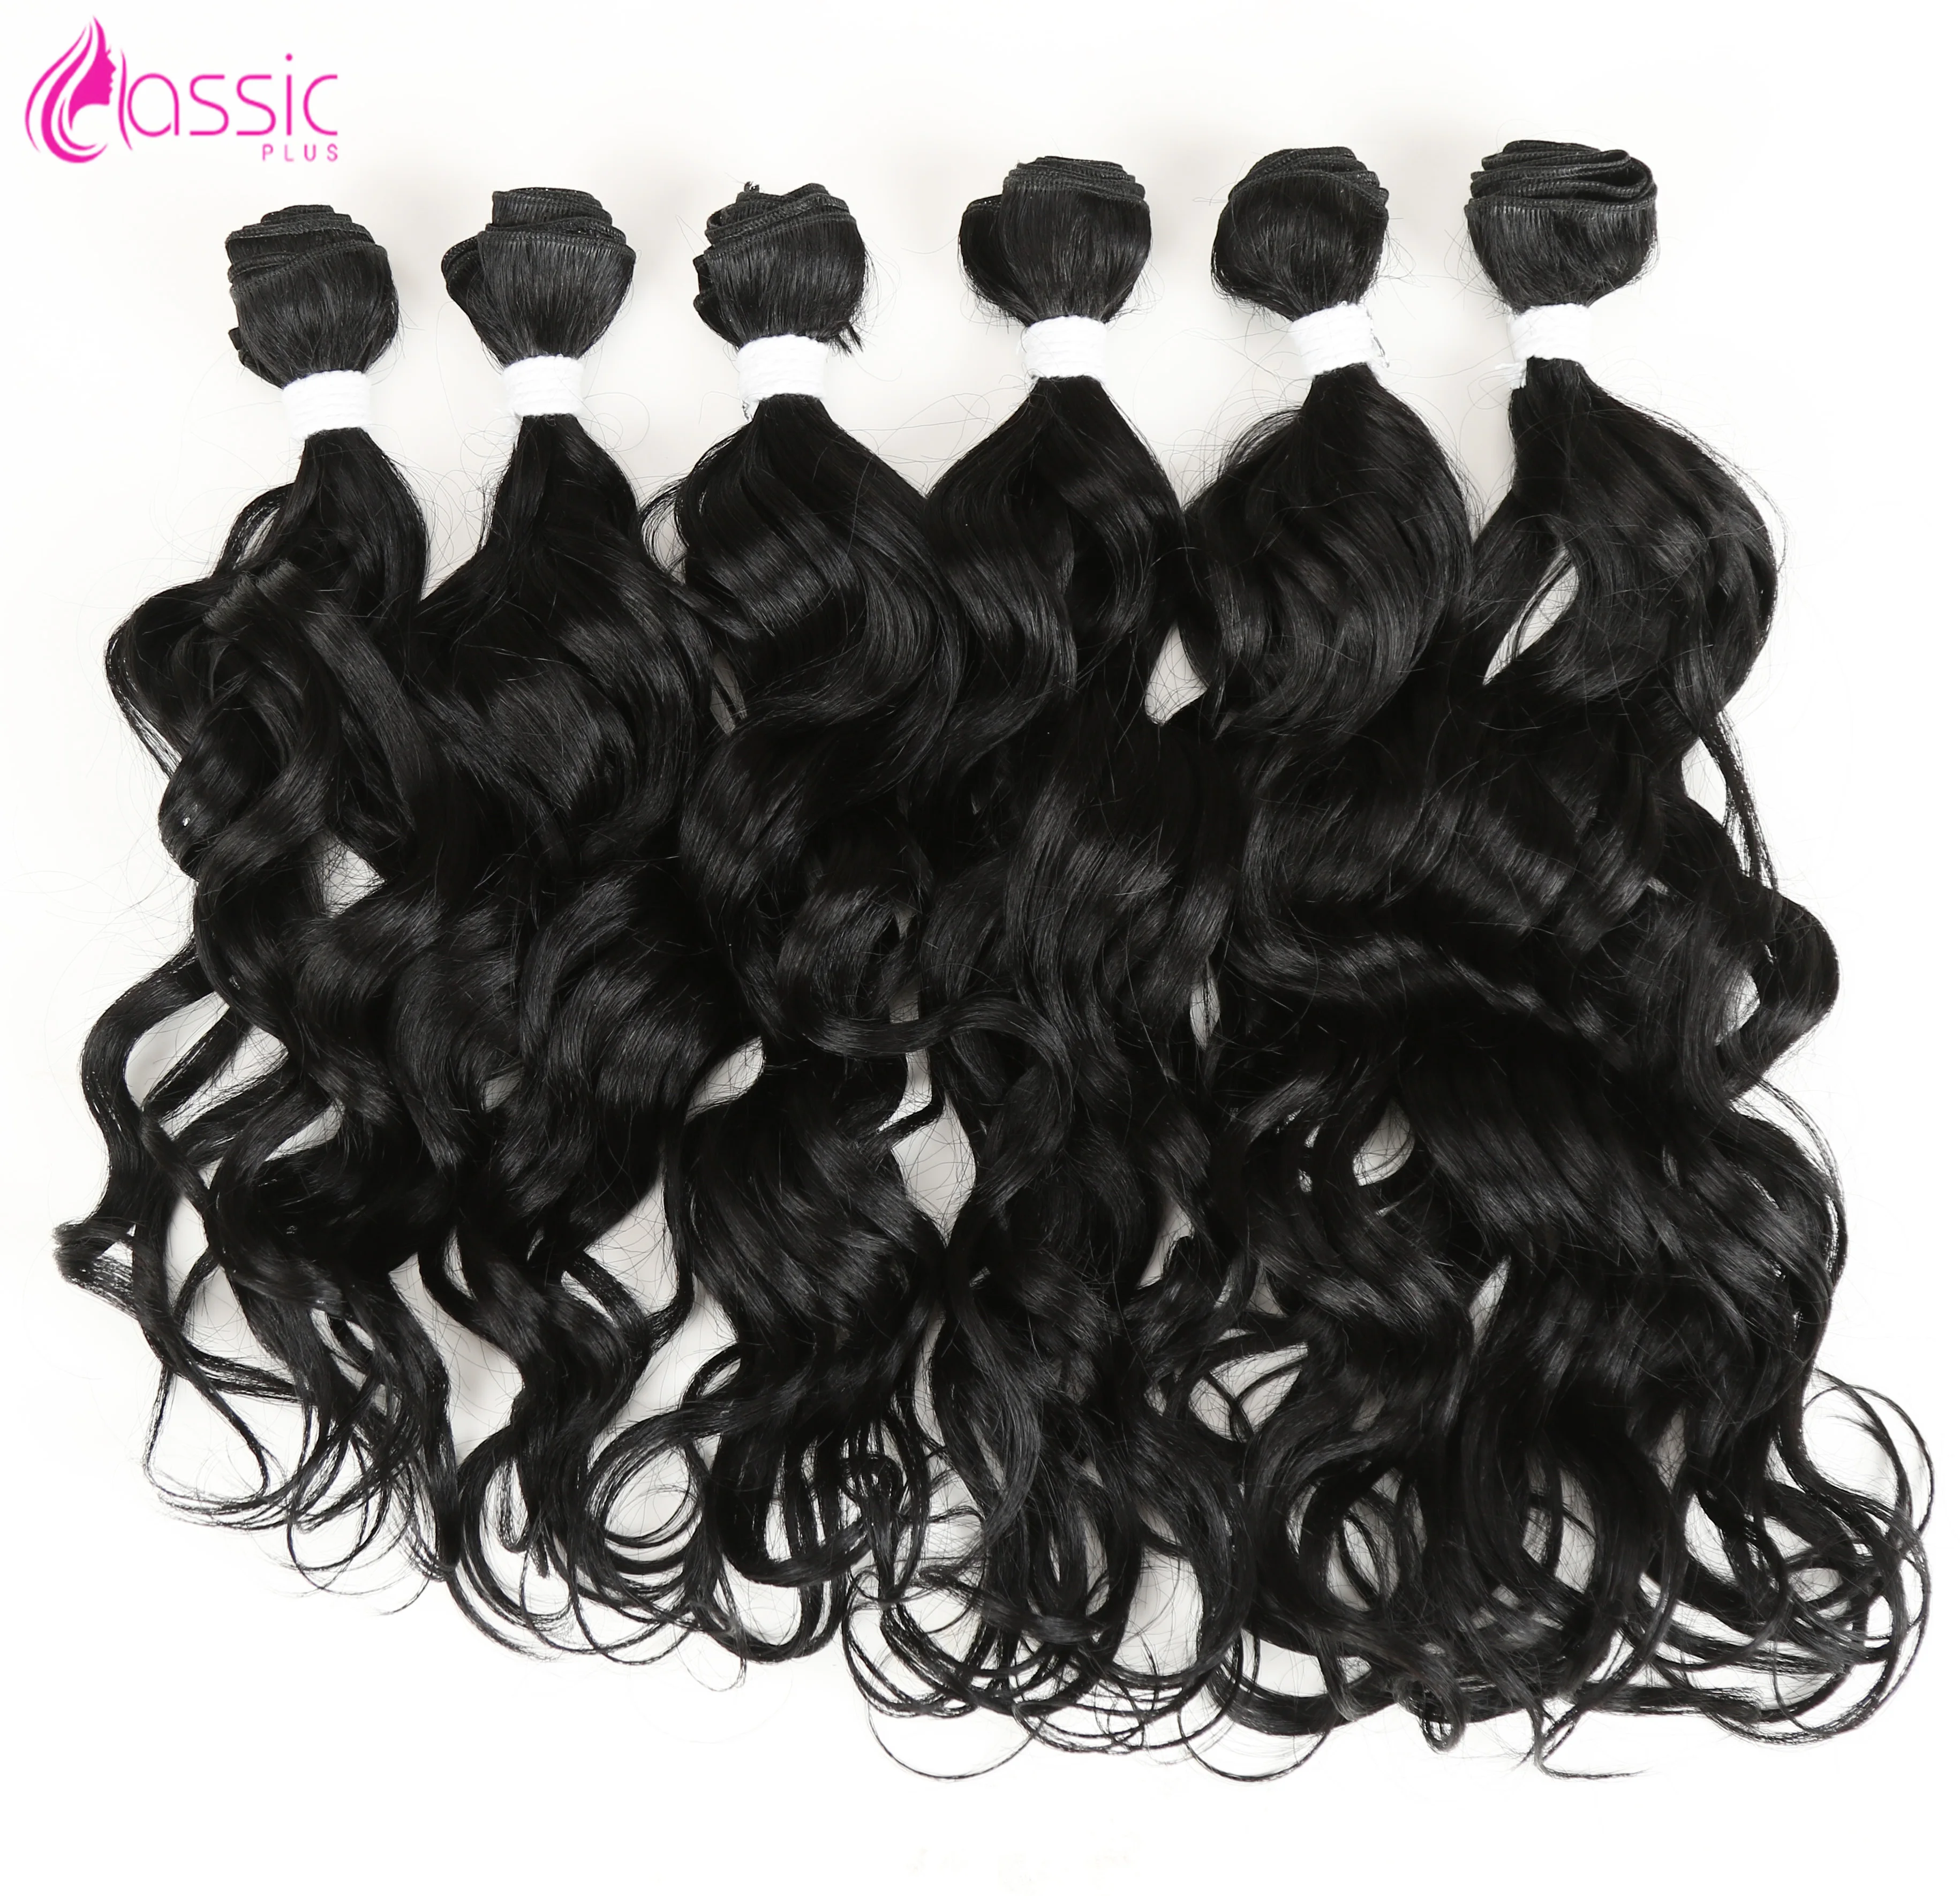 

CLASSIC PLUS Deep Wave Bundles Hair Weave Bundles Ombre Black 6Pieces 16-20 Inch 250g Synthetic Hair Extensions Nature Curly Wig